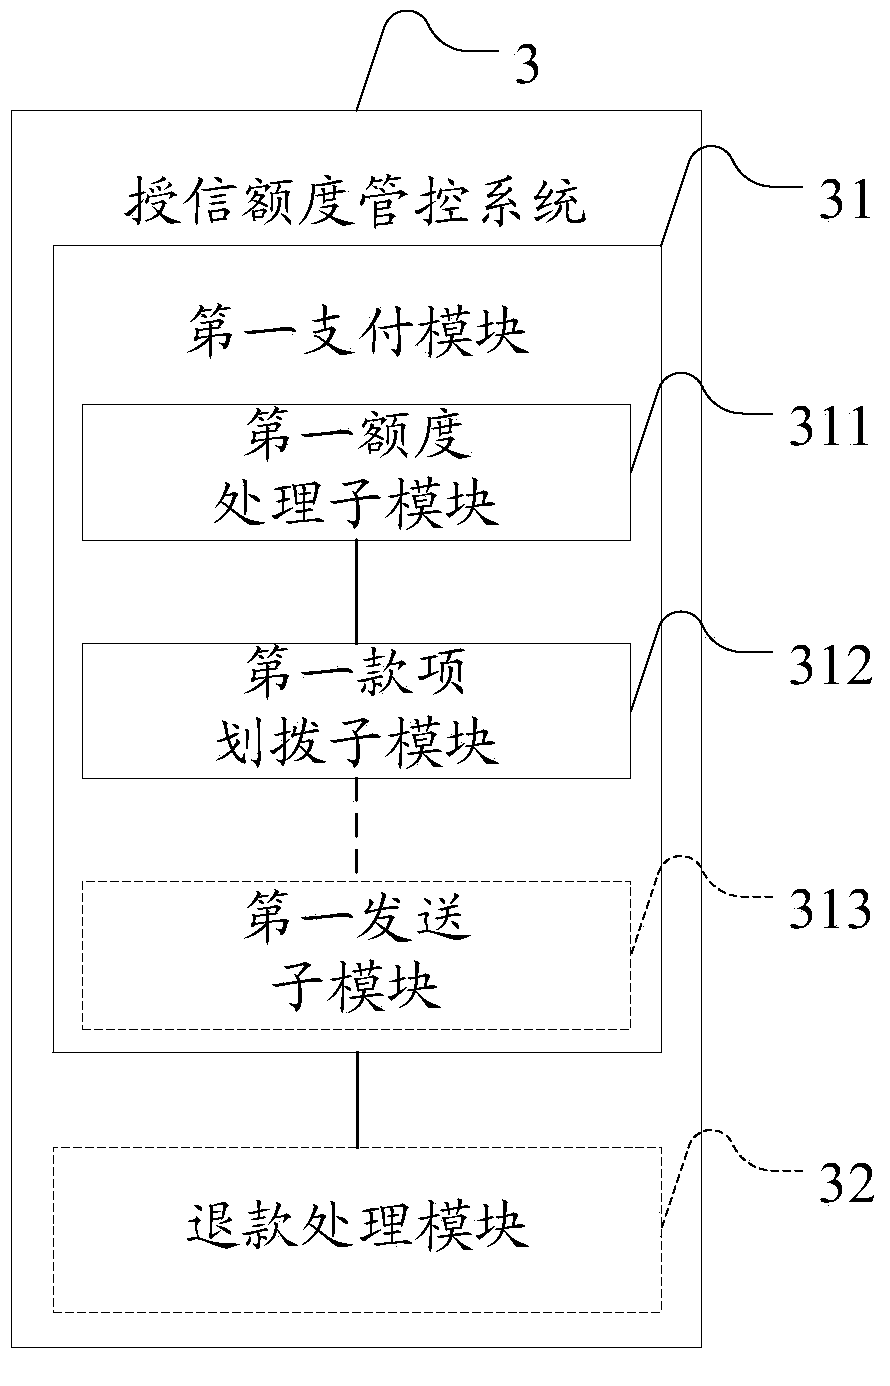 Data processing system and method suitable for financing payment